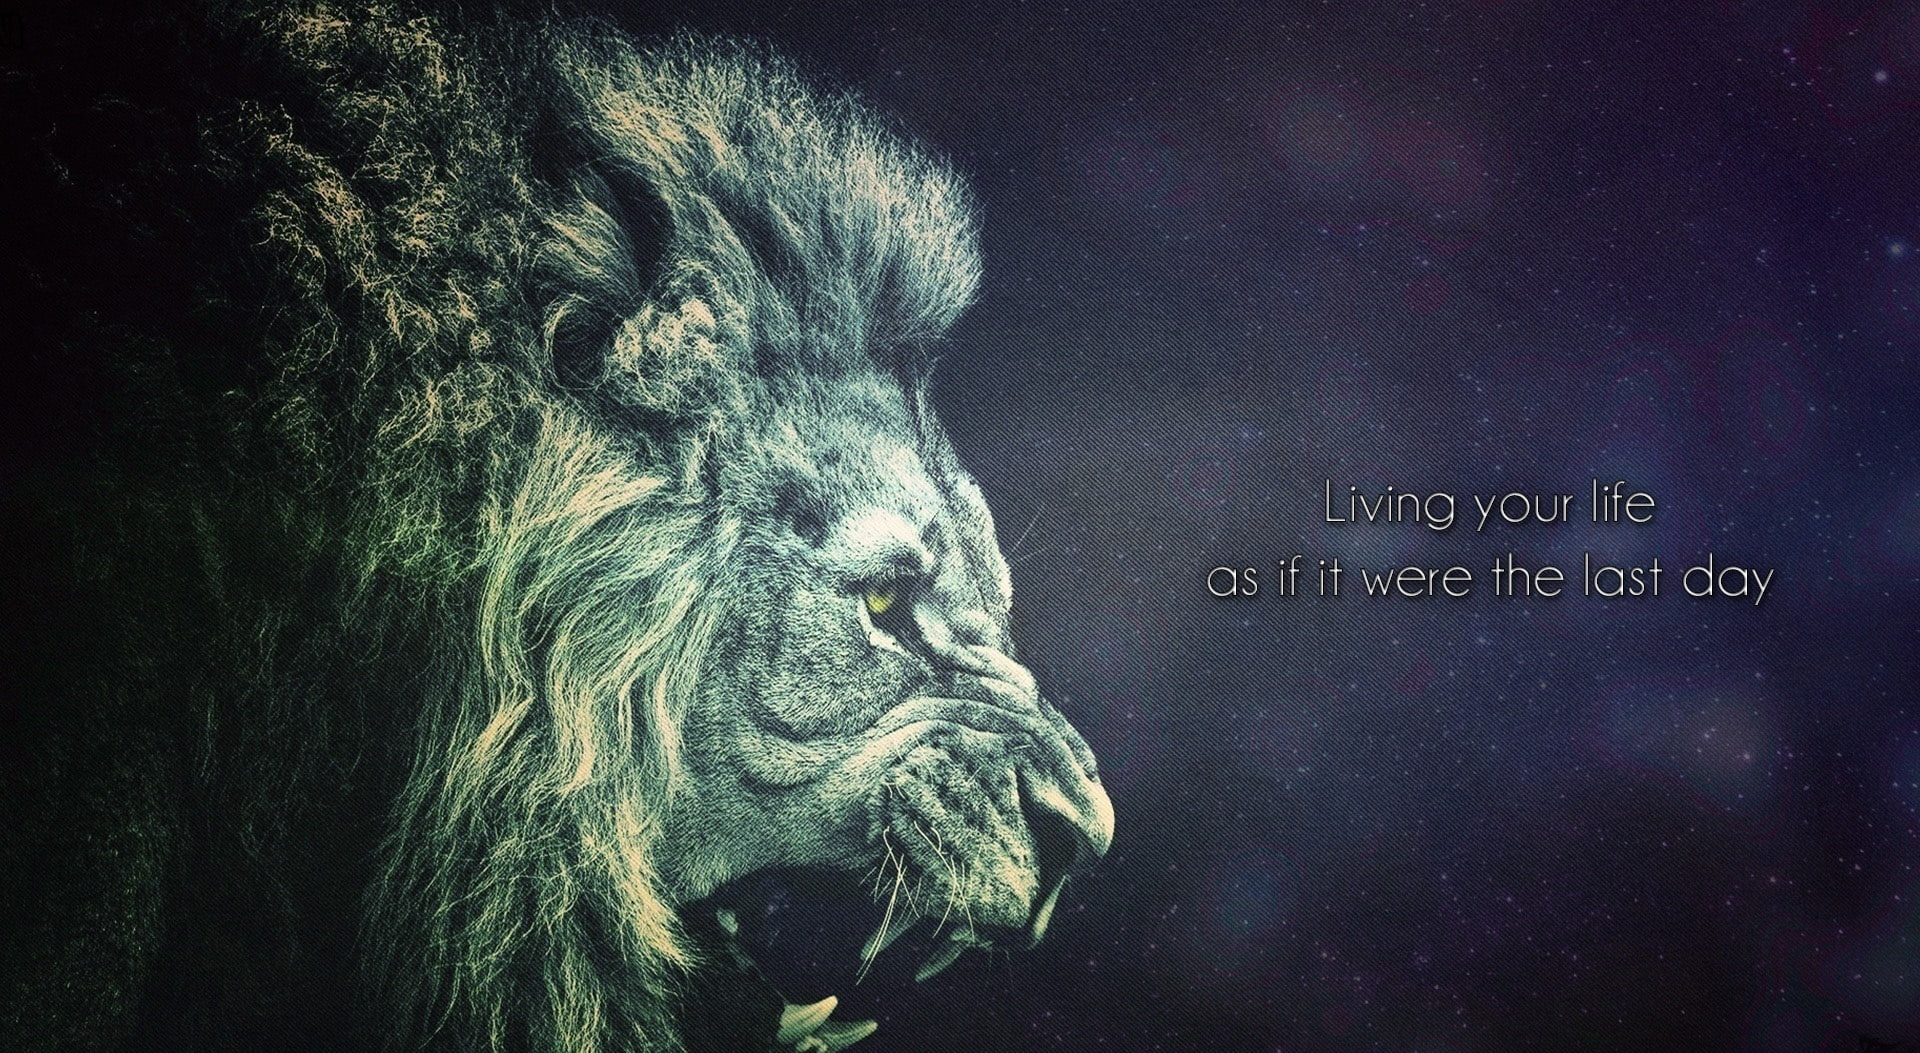 Living Your Life as if it were the Last Day, grey lion illustration